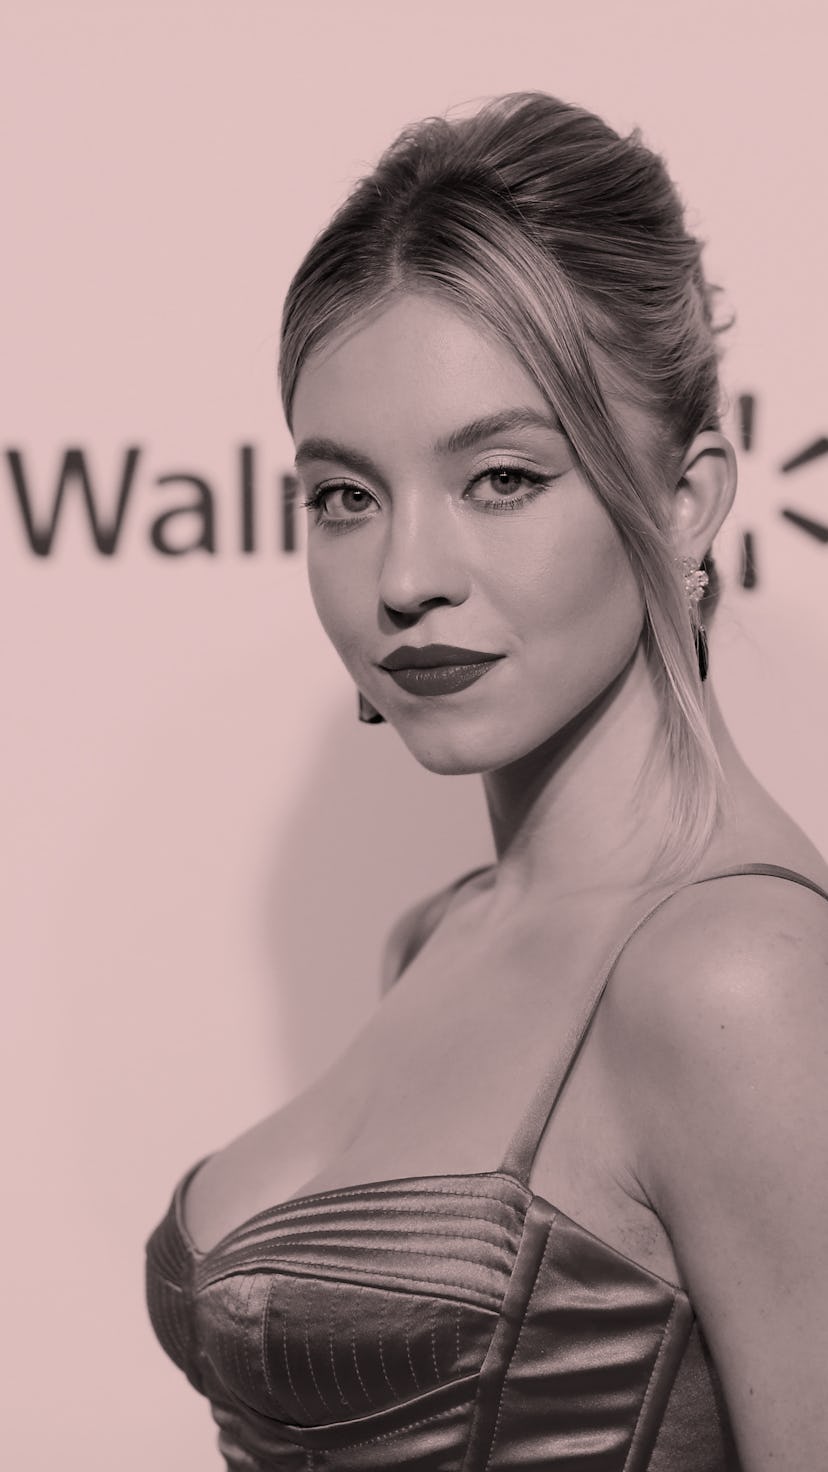 Actress Sydney Sweeney on the red carpet with red lipstick.